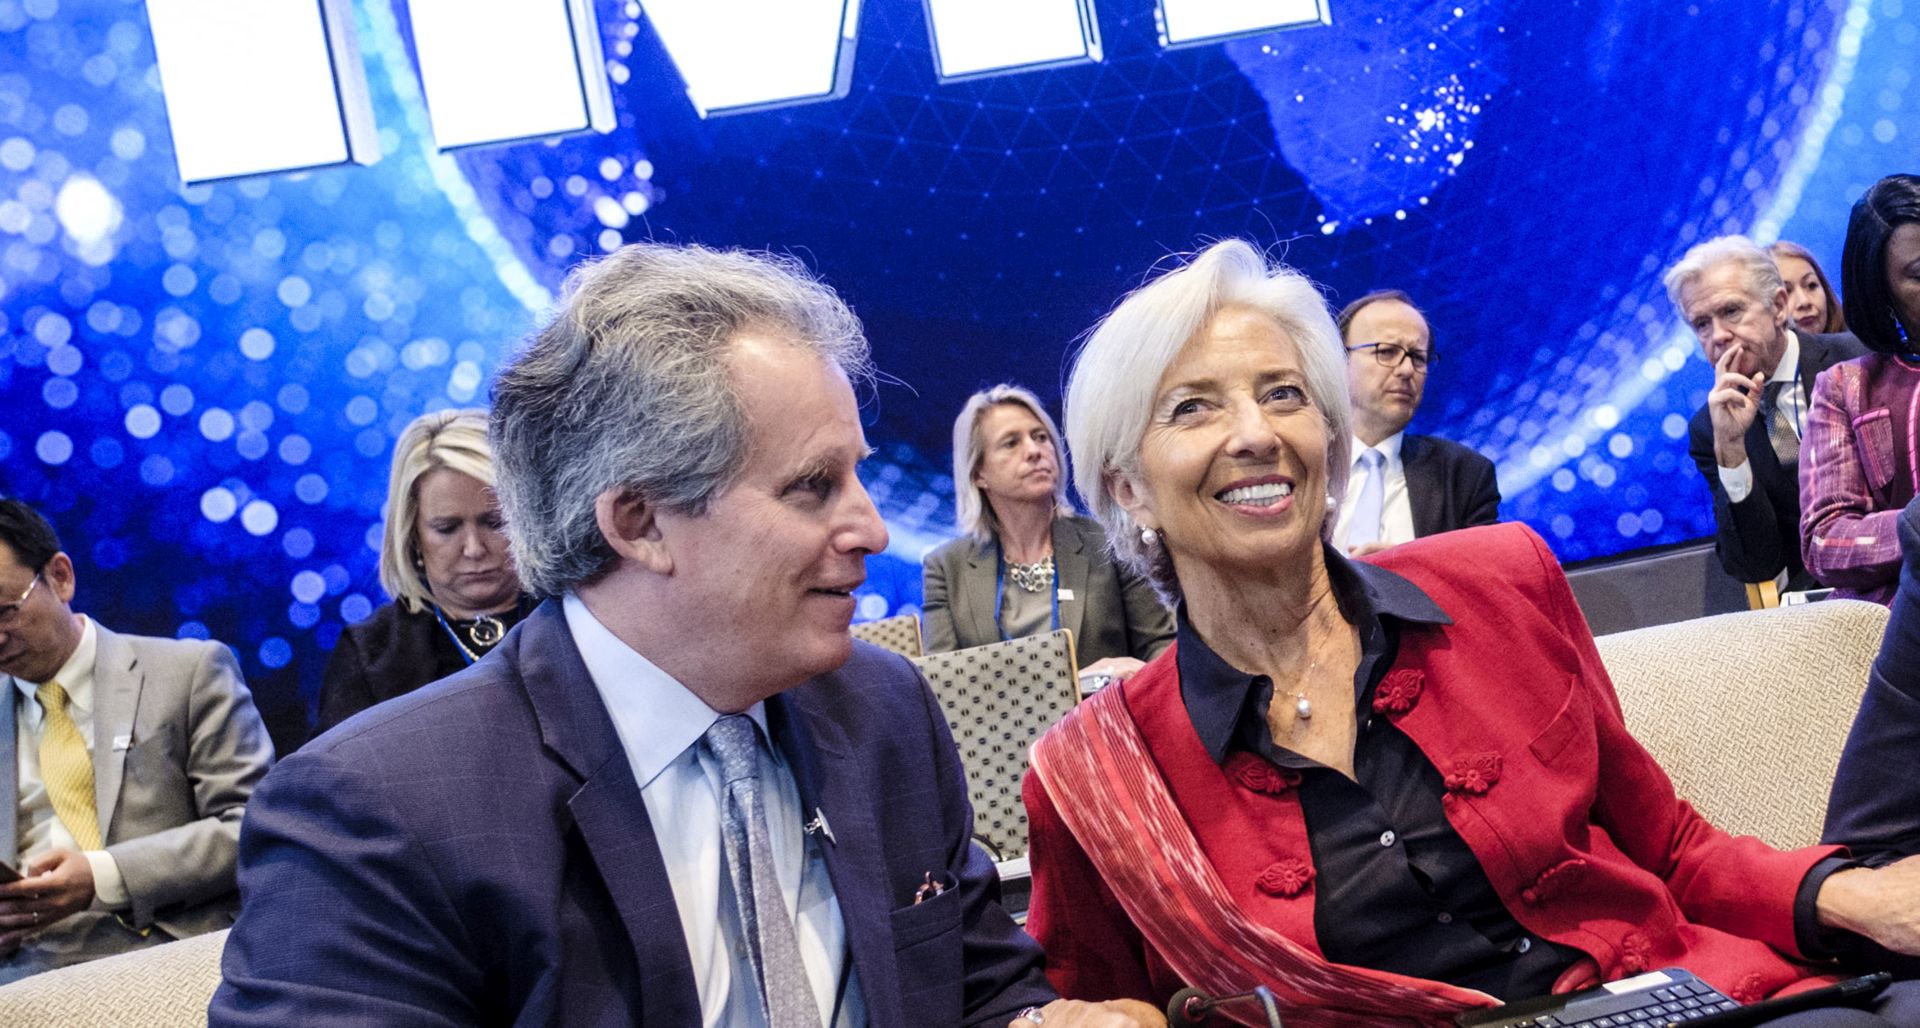 epa07690696 (FILE) - David Lipton, deputy managing director at the International Monetary Fund (L), Managing Director of the International Monetary Fund, Christine Lagarde (C) during the IMF World Bank Spring Meetings at the IMF headquarters in Washington, DC, USA, 21 April 2018 (Reeissued 02 July 2019). David Lipton was named by the IMF board as Interim President after Christine Lagarde stepped down temporarily after she was nominated to head the European Central Bank.  EPA/PETE MAROVICH